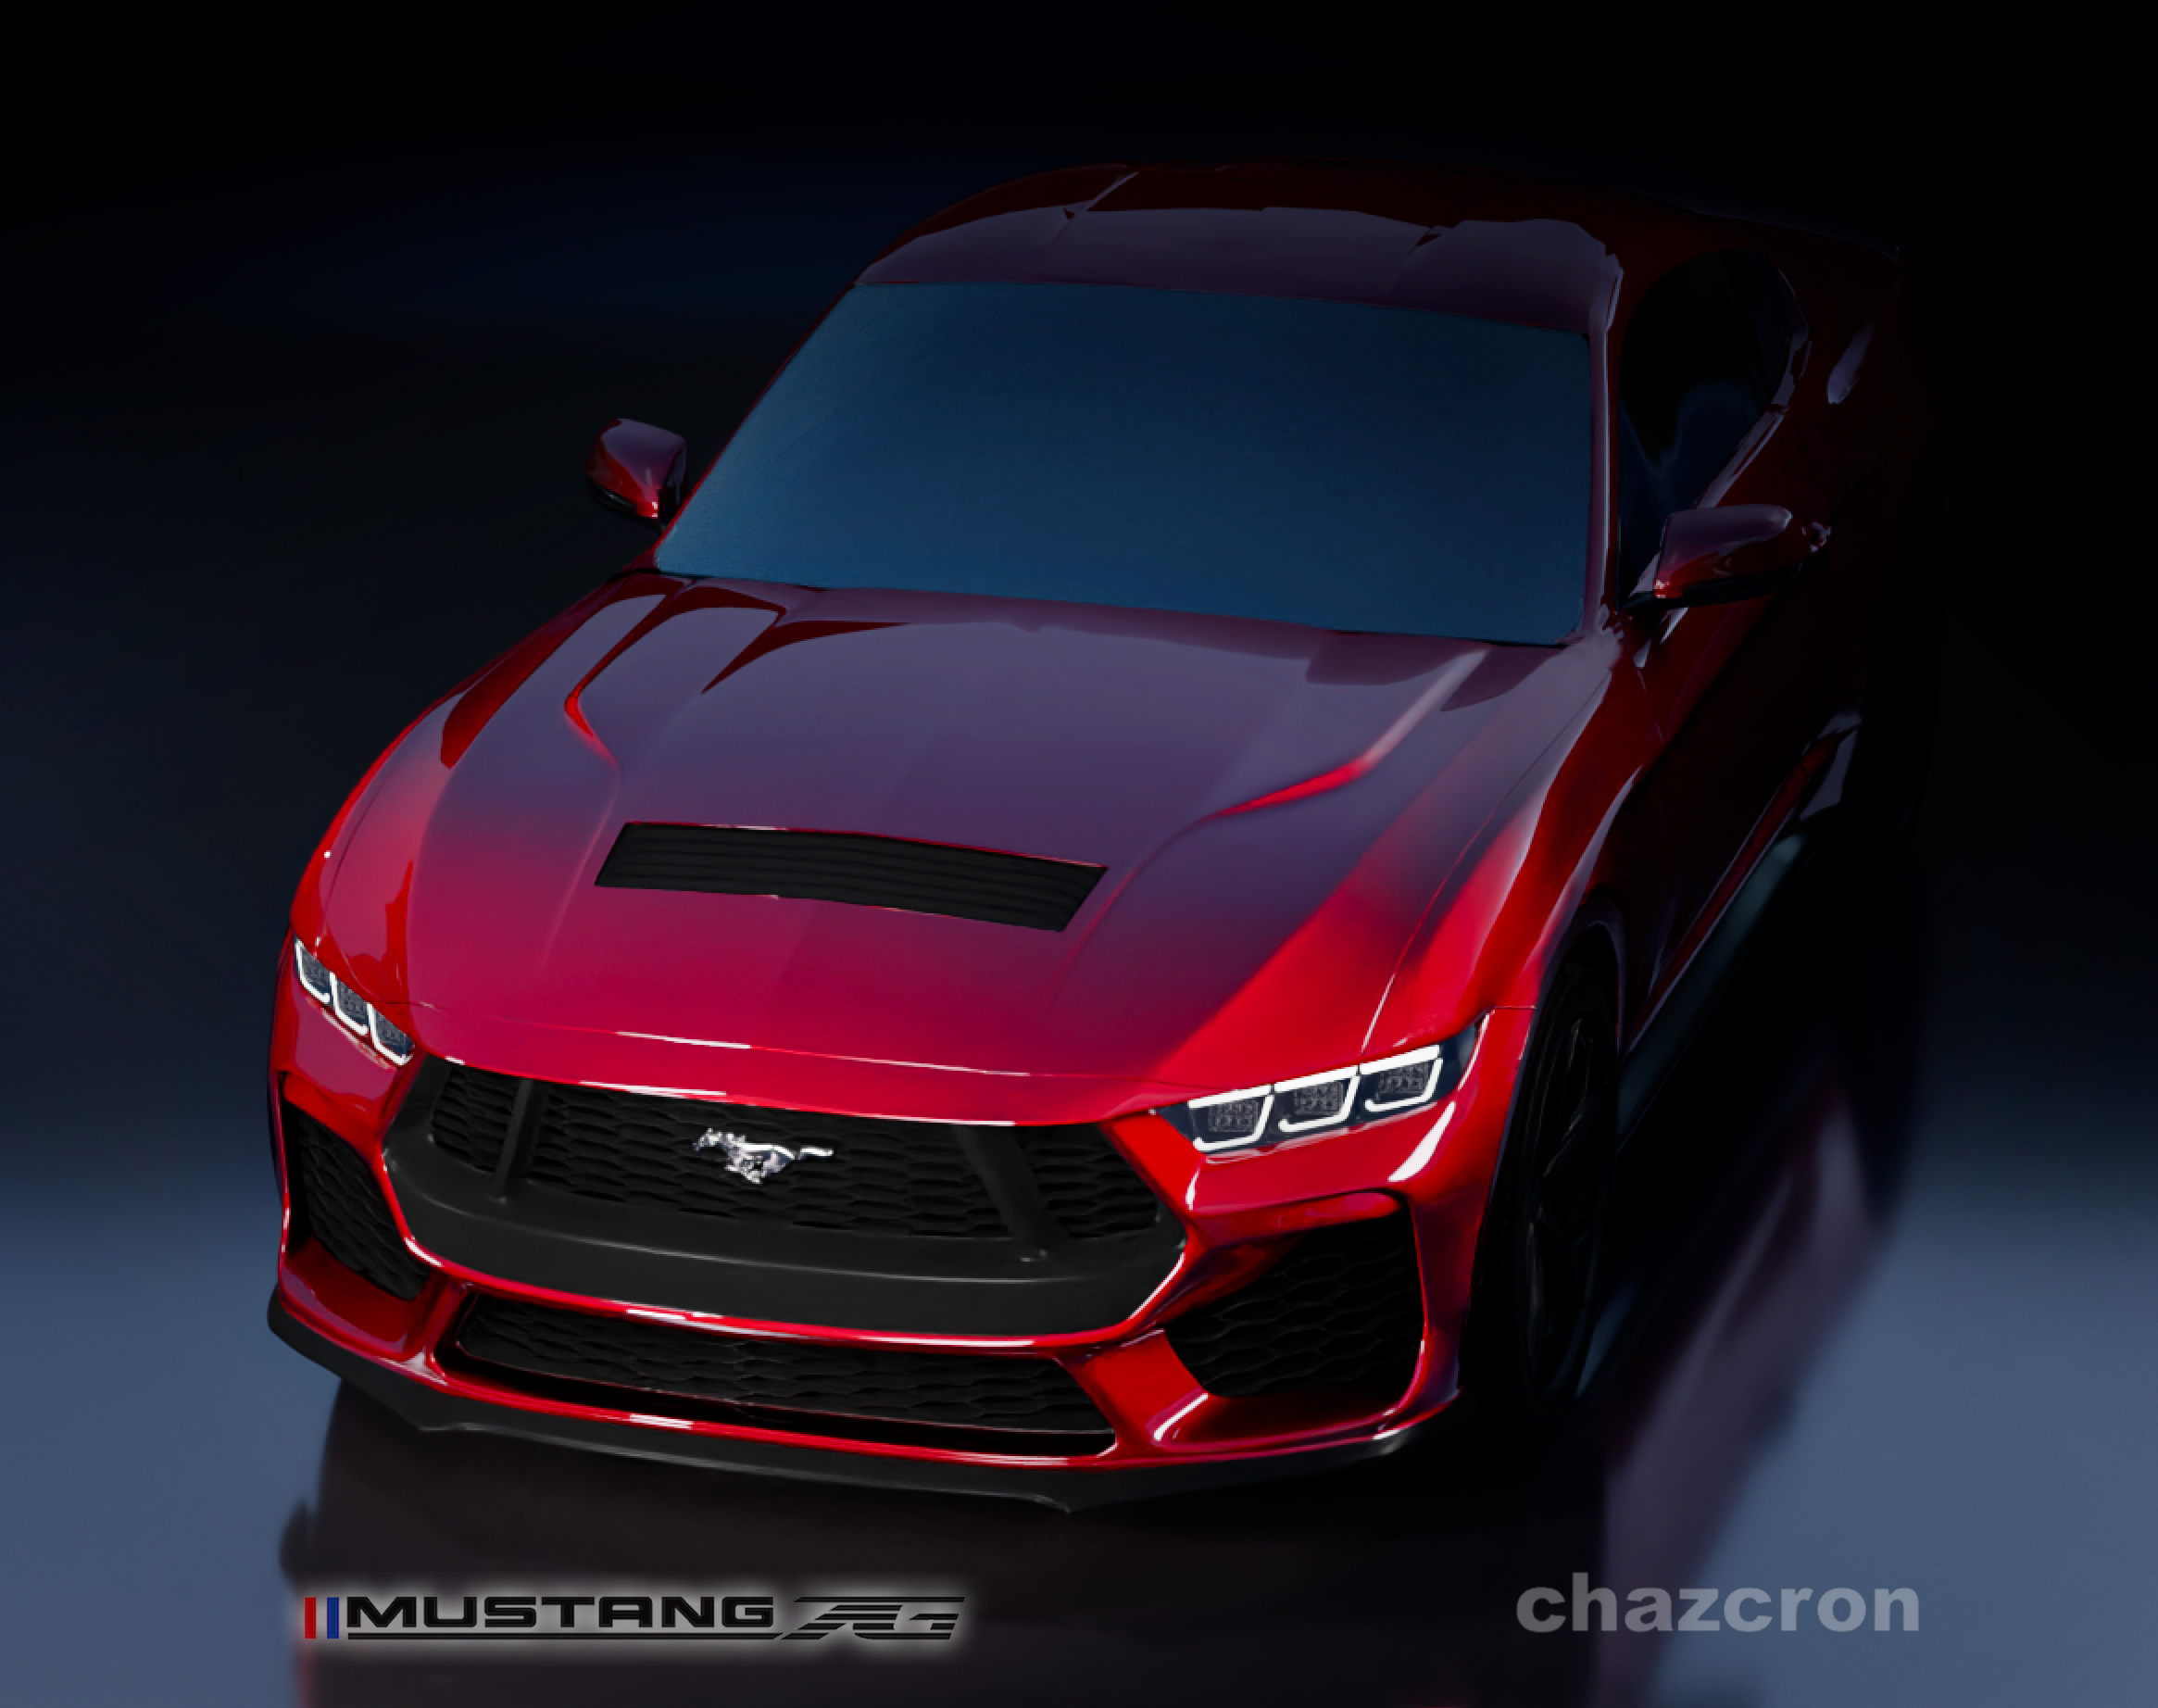 S650 Mustang chazcron weighs in... 7th gen 2023 Mustang S650 3D model & renderings in several colors! Hood_Conjecture_in_Red